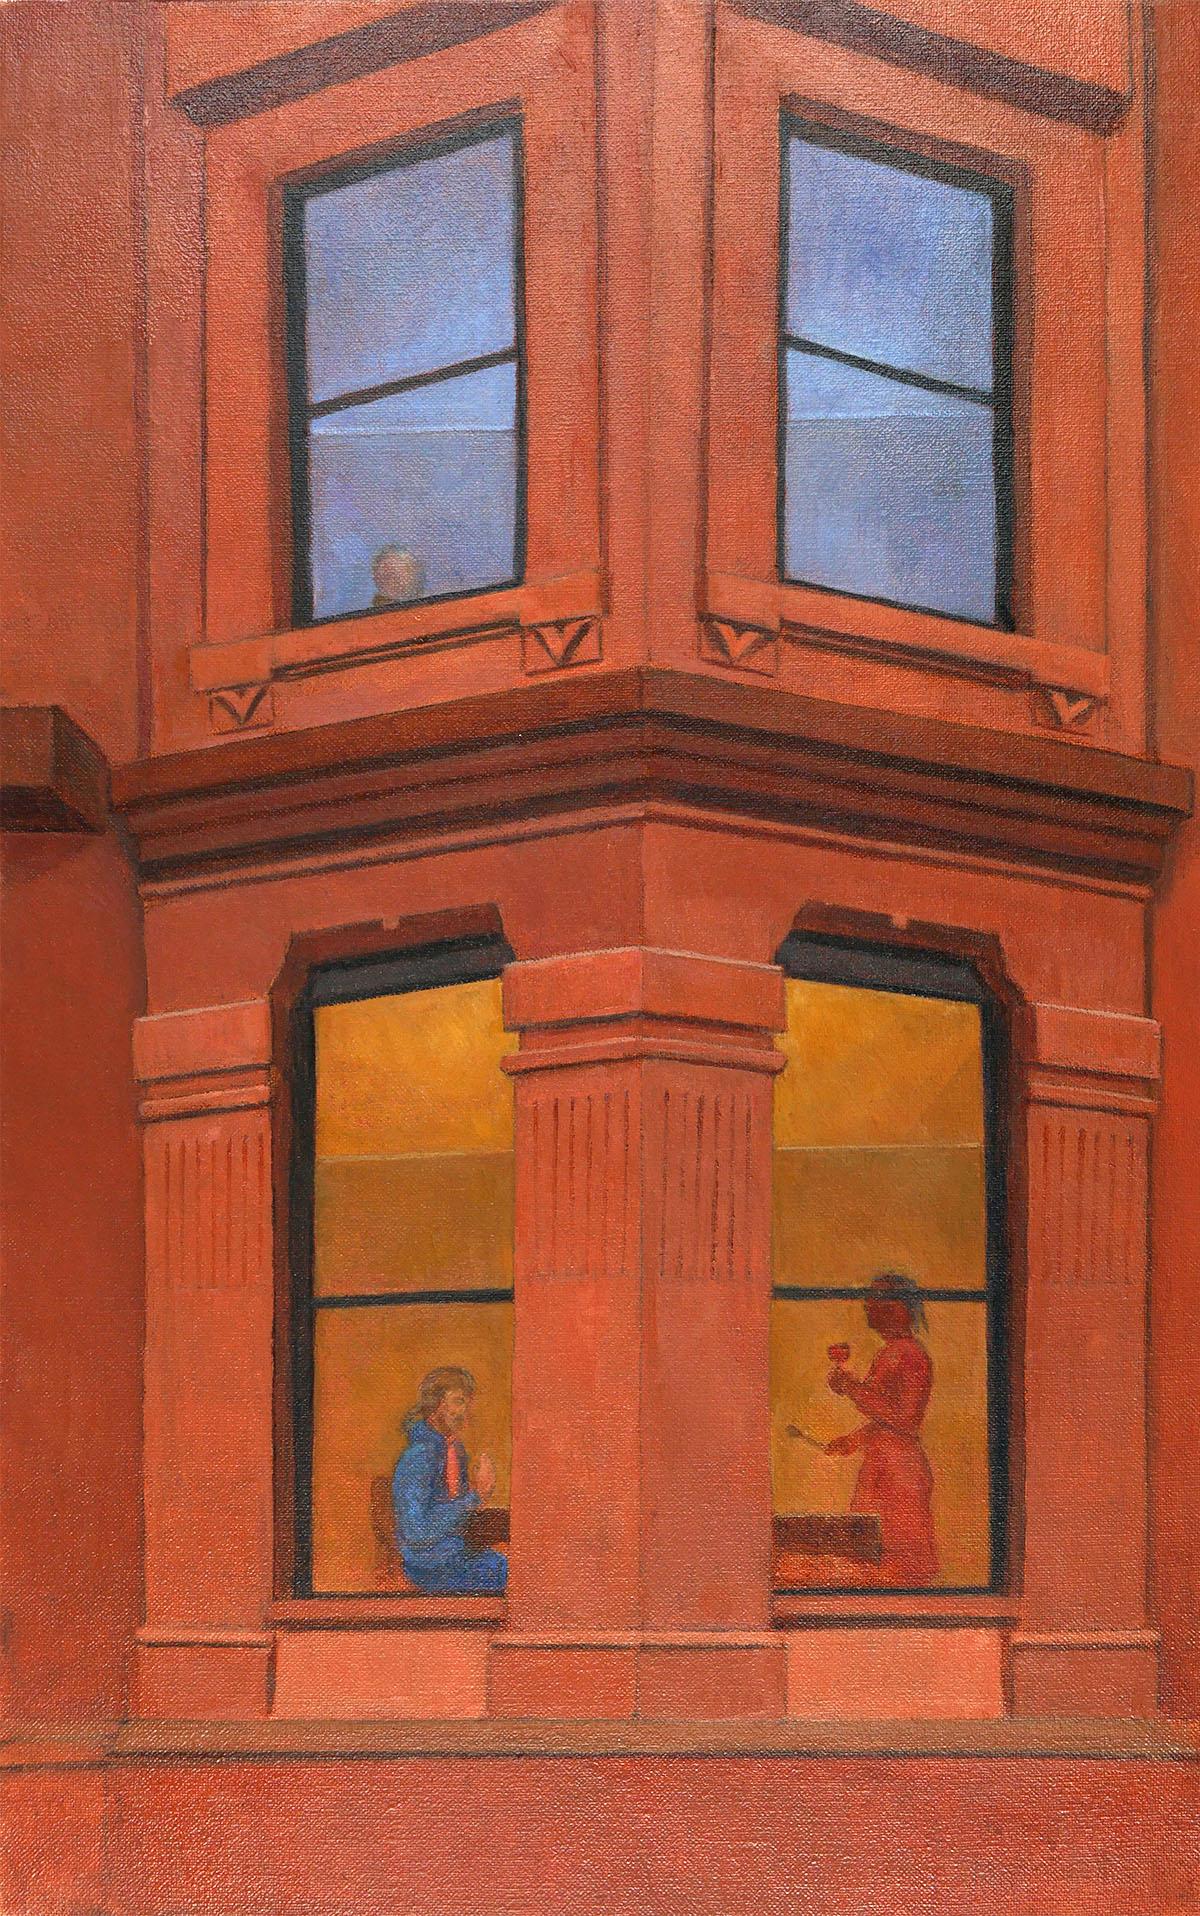 Gregory Frux Landscape Painting - Two Stories, historic urban architecture, cityscape, orange and red brick